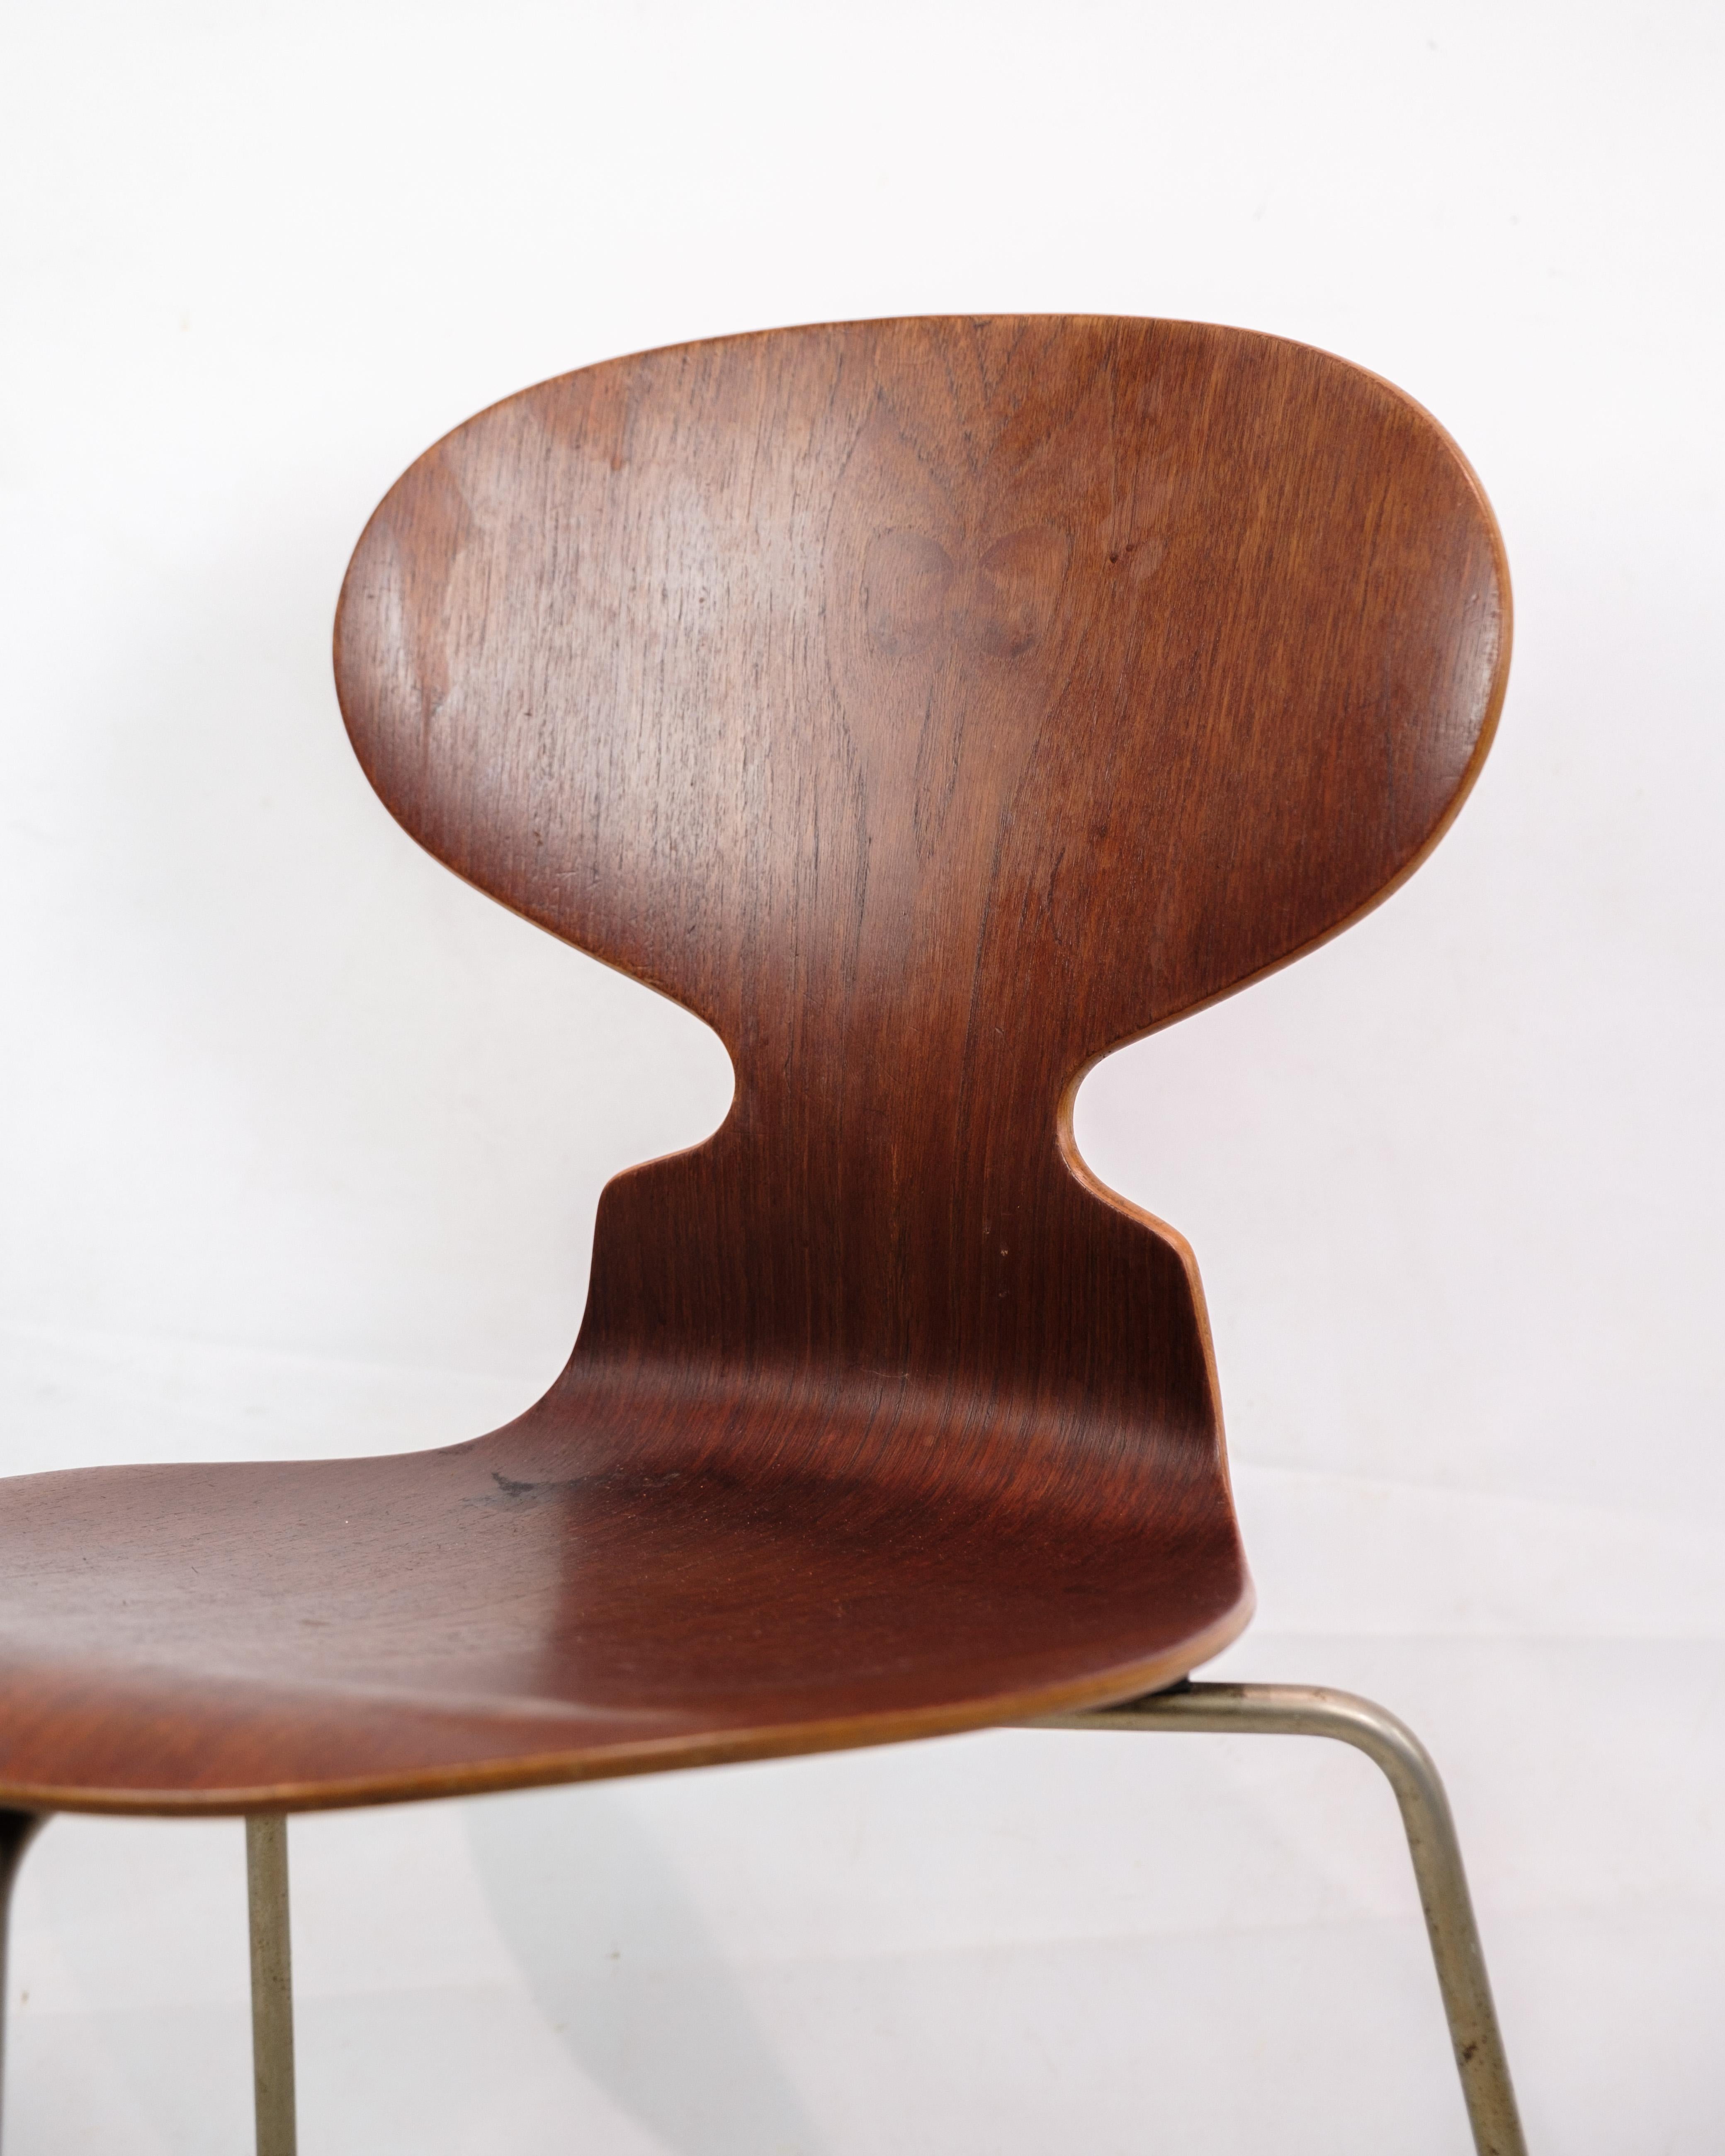 This chair is known as the Model 3100 Myren, designed by the iconic Danish architect and designer Arne Jacobsen for Fritz Hansen in 1950. The chair is famous for its distinctive, organically shaped seat that resembles the silhouette of an ant,